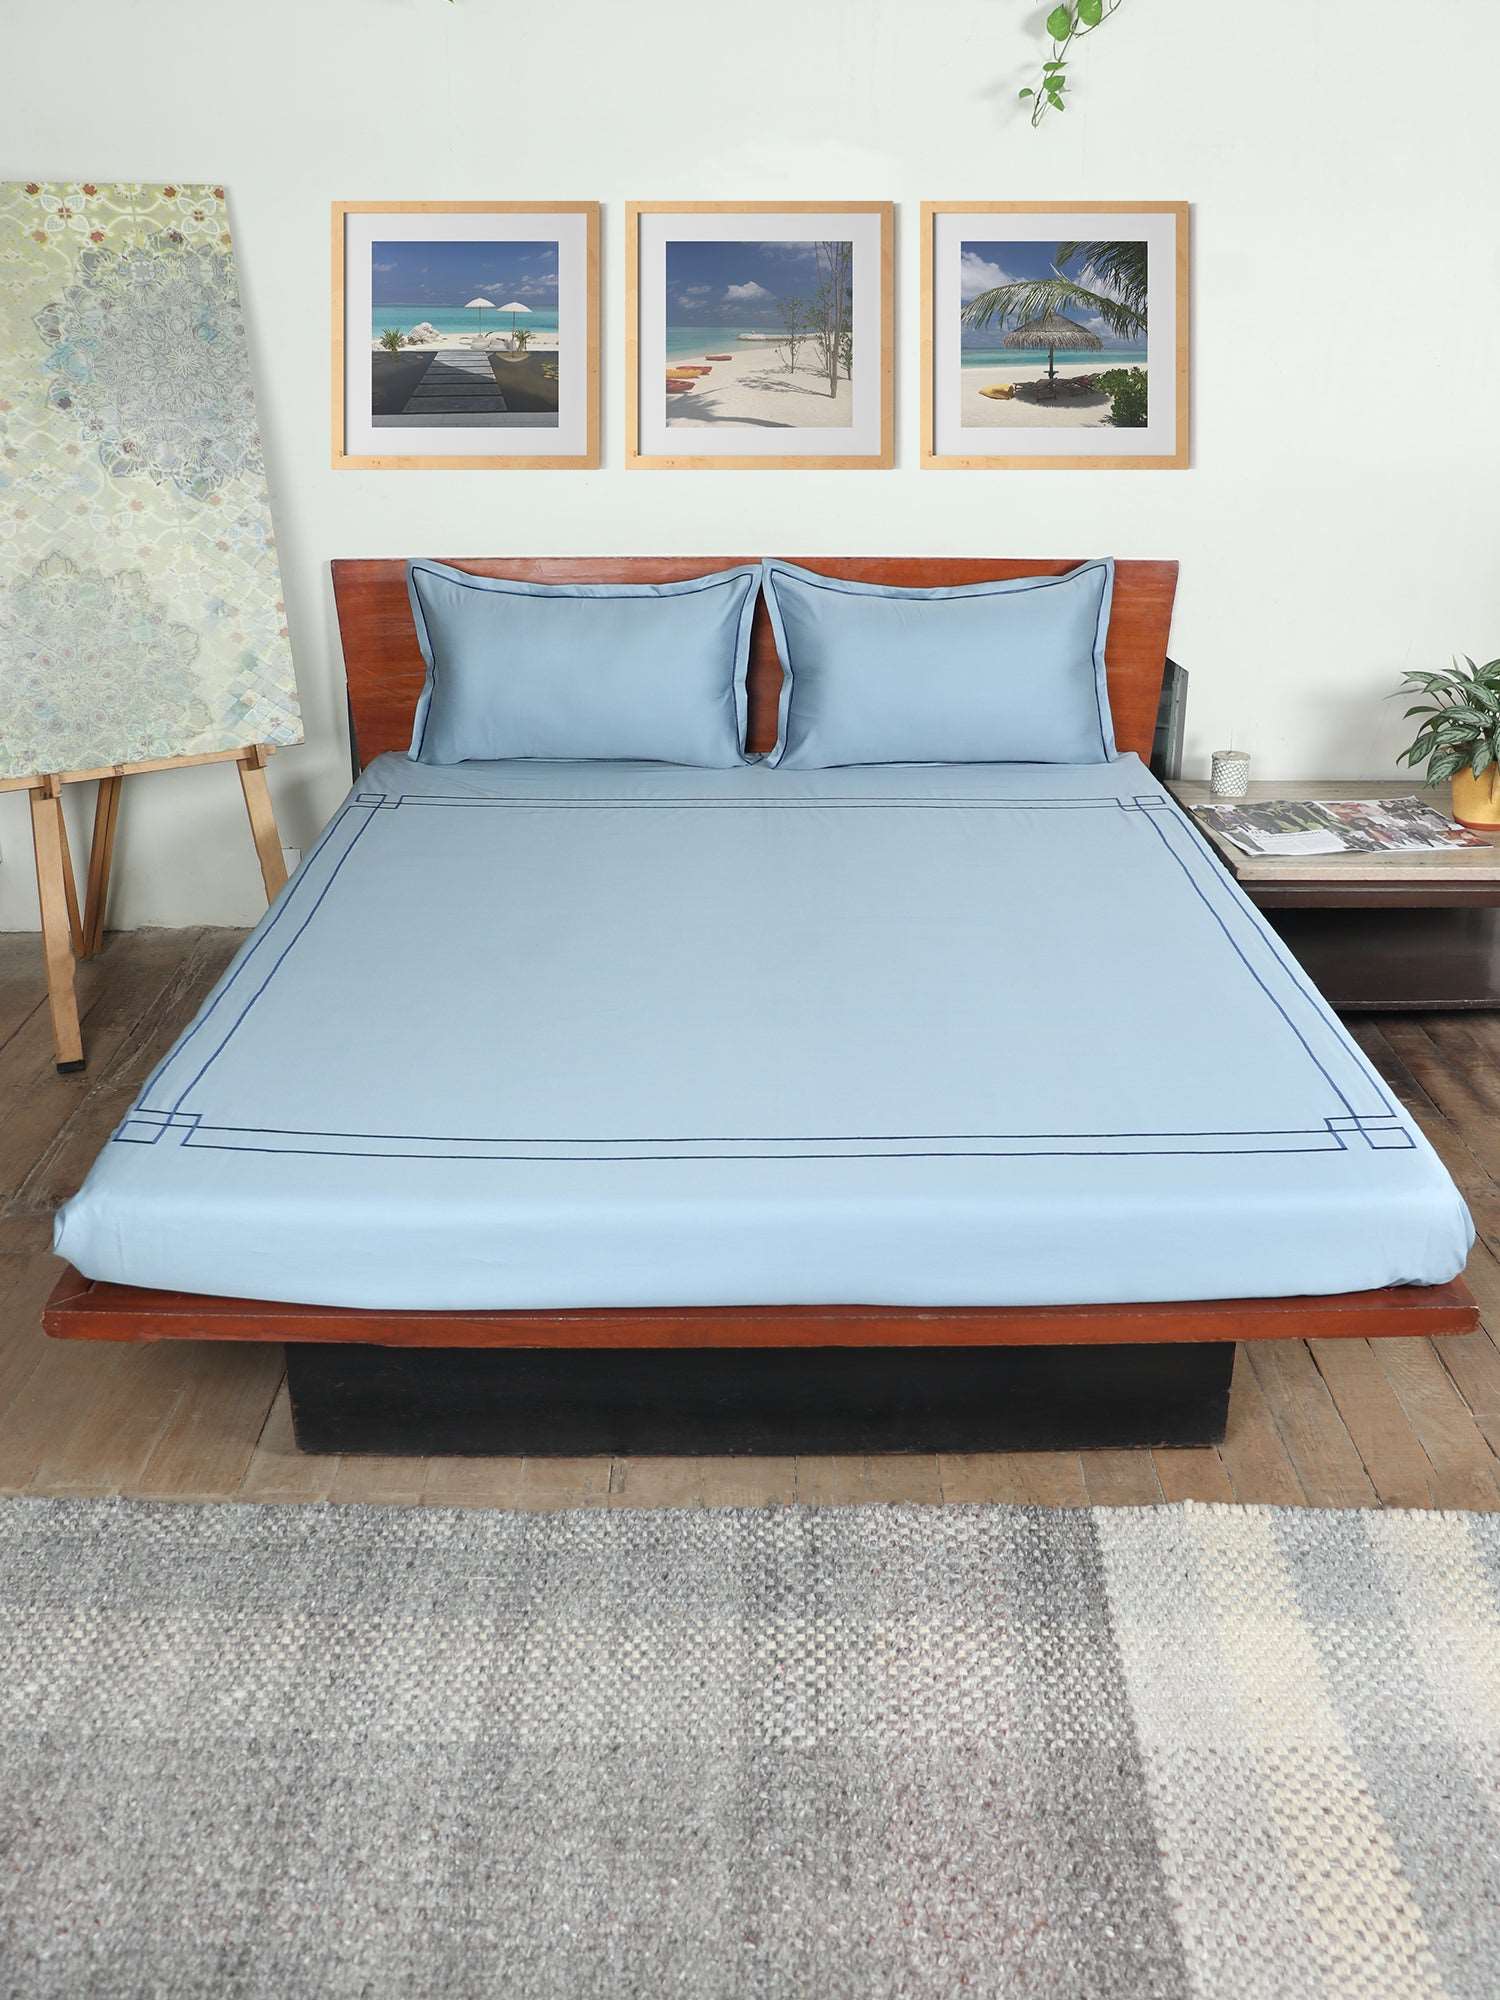 Bedsheet 100% Cotton 800TC Embroidered for King Size Double Bed with Pillow Covers Light Blue - Bedsheet 108x108inches, Pillow Covers 17x27inches